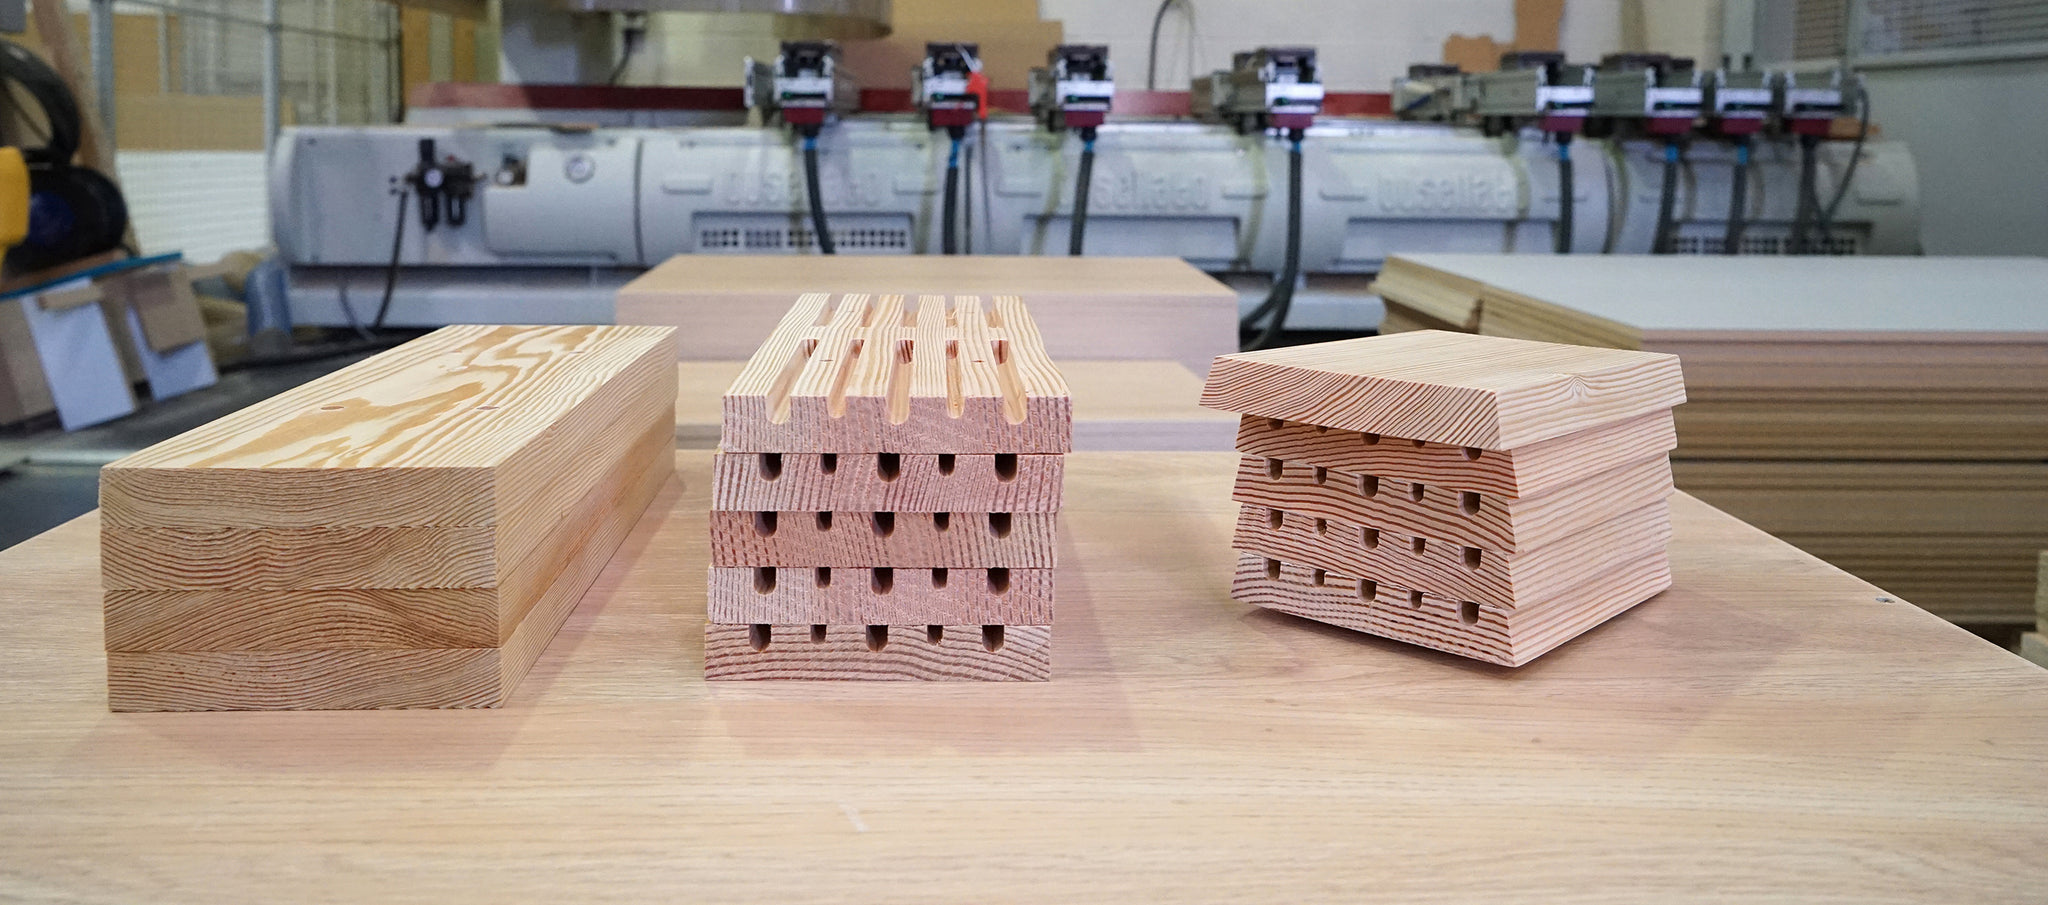 Hive Five bee houses ready for assembly